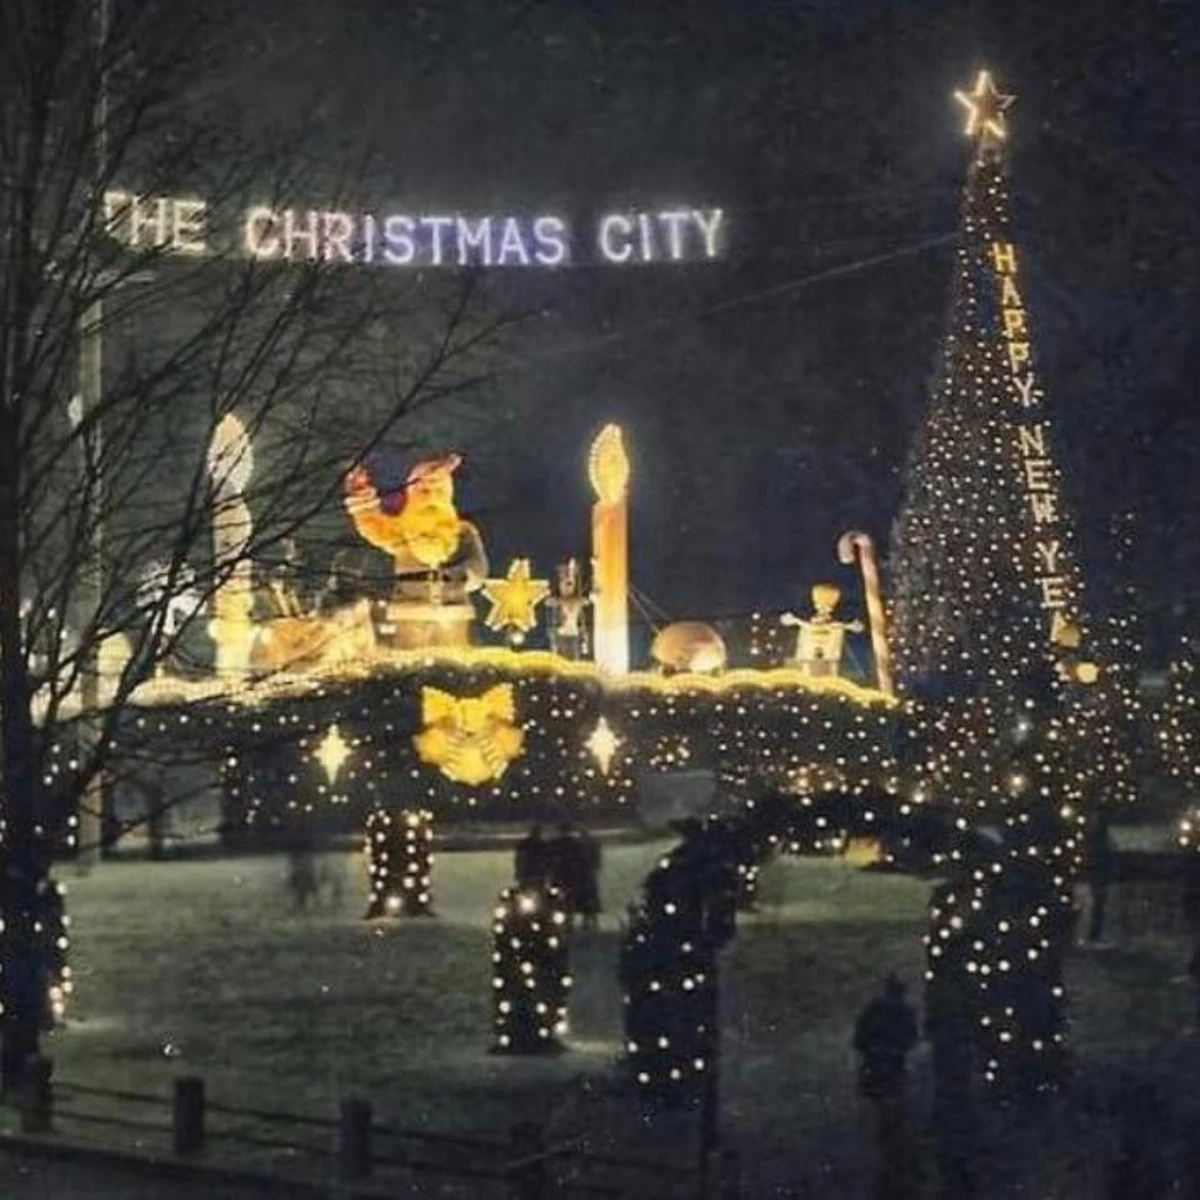  This Massachusetts City Is Dubbed ‘The Christmas City’ 